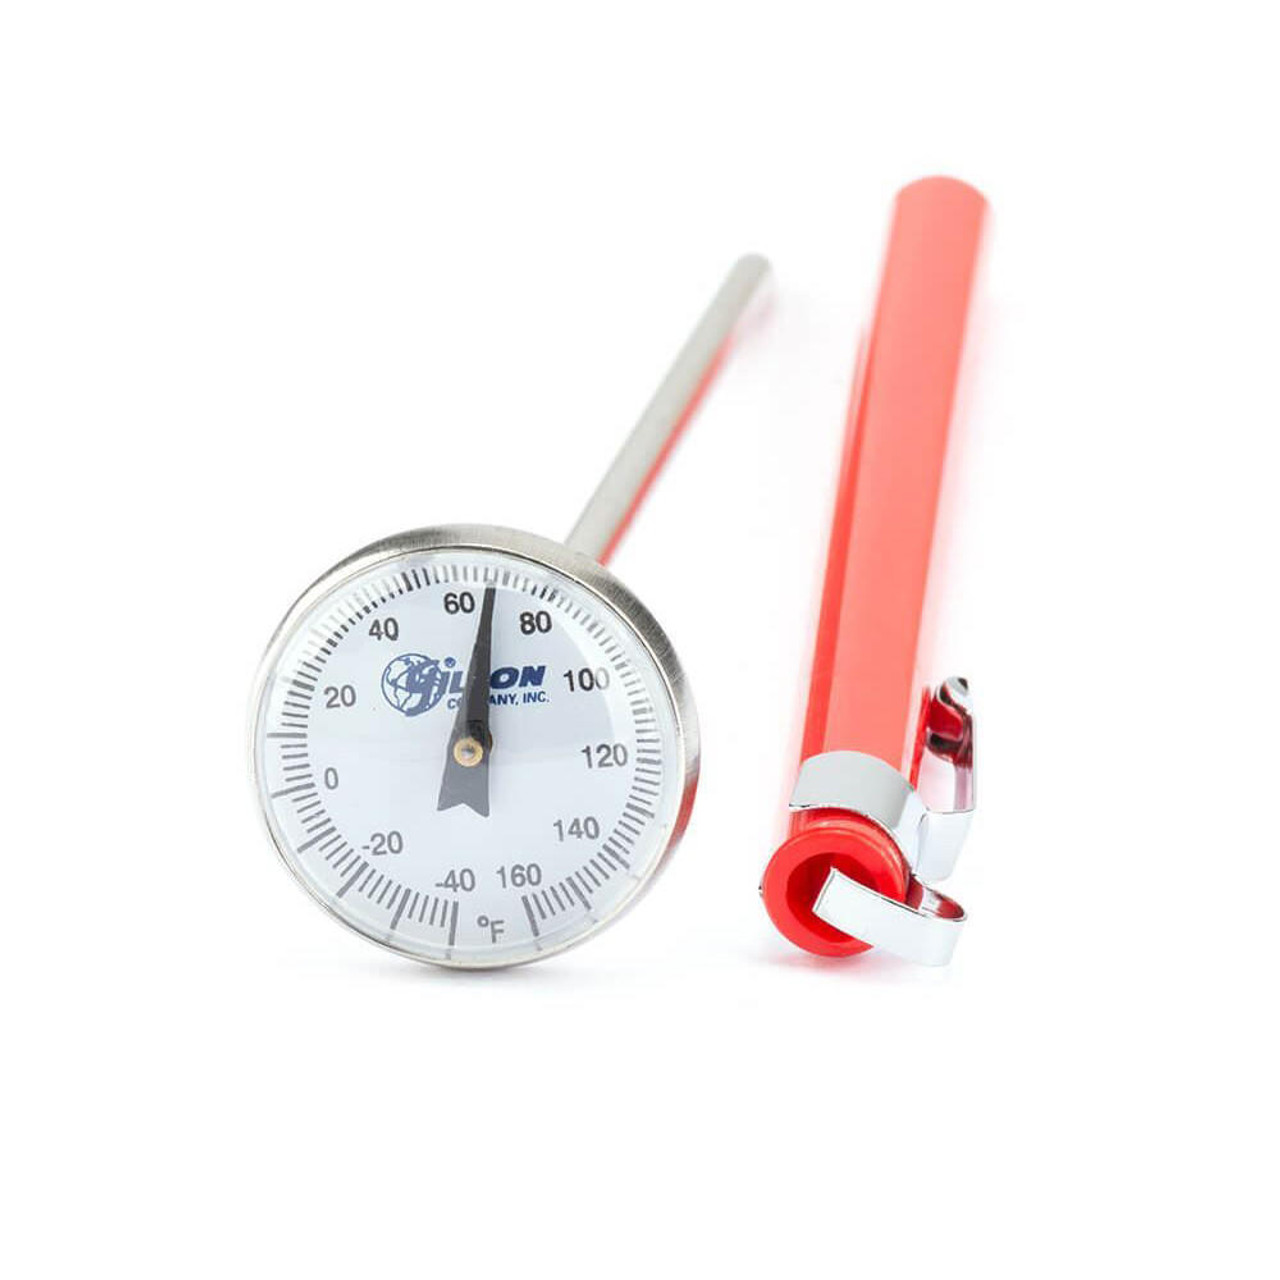 https://cdn11.bigcommerce.com/s-zgzol/images/stencil/1280x1280/products/8804/237433/gilson-company-pocket-dial-thermometer-40-to-160f-5in-stem-1in-dial__61293.1698295622.jpg?c=2